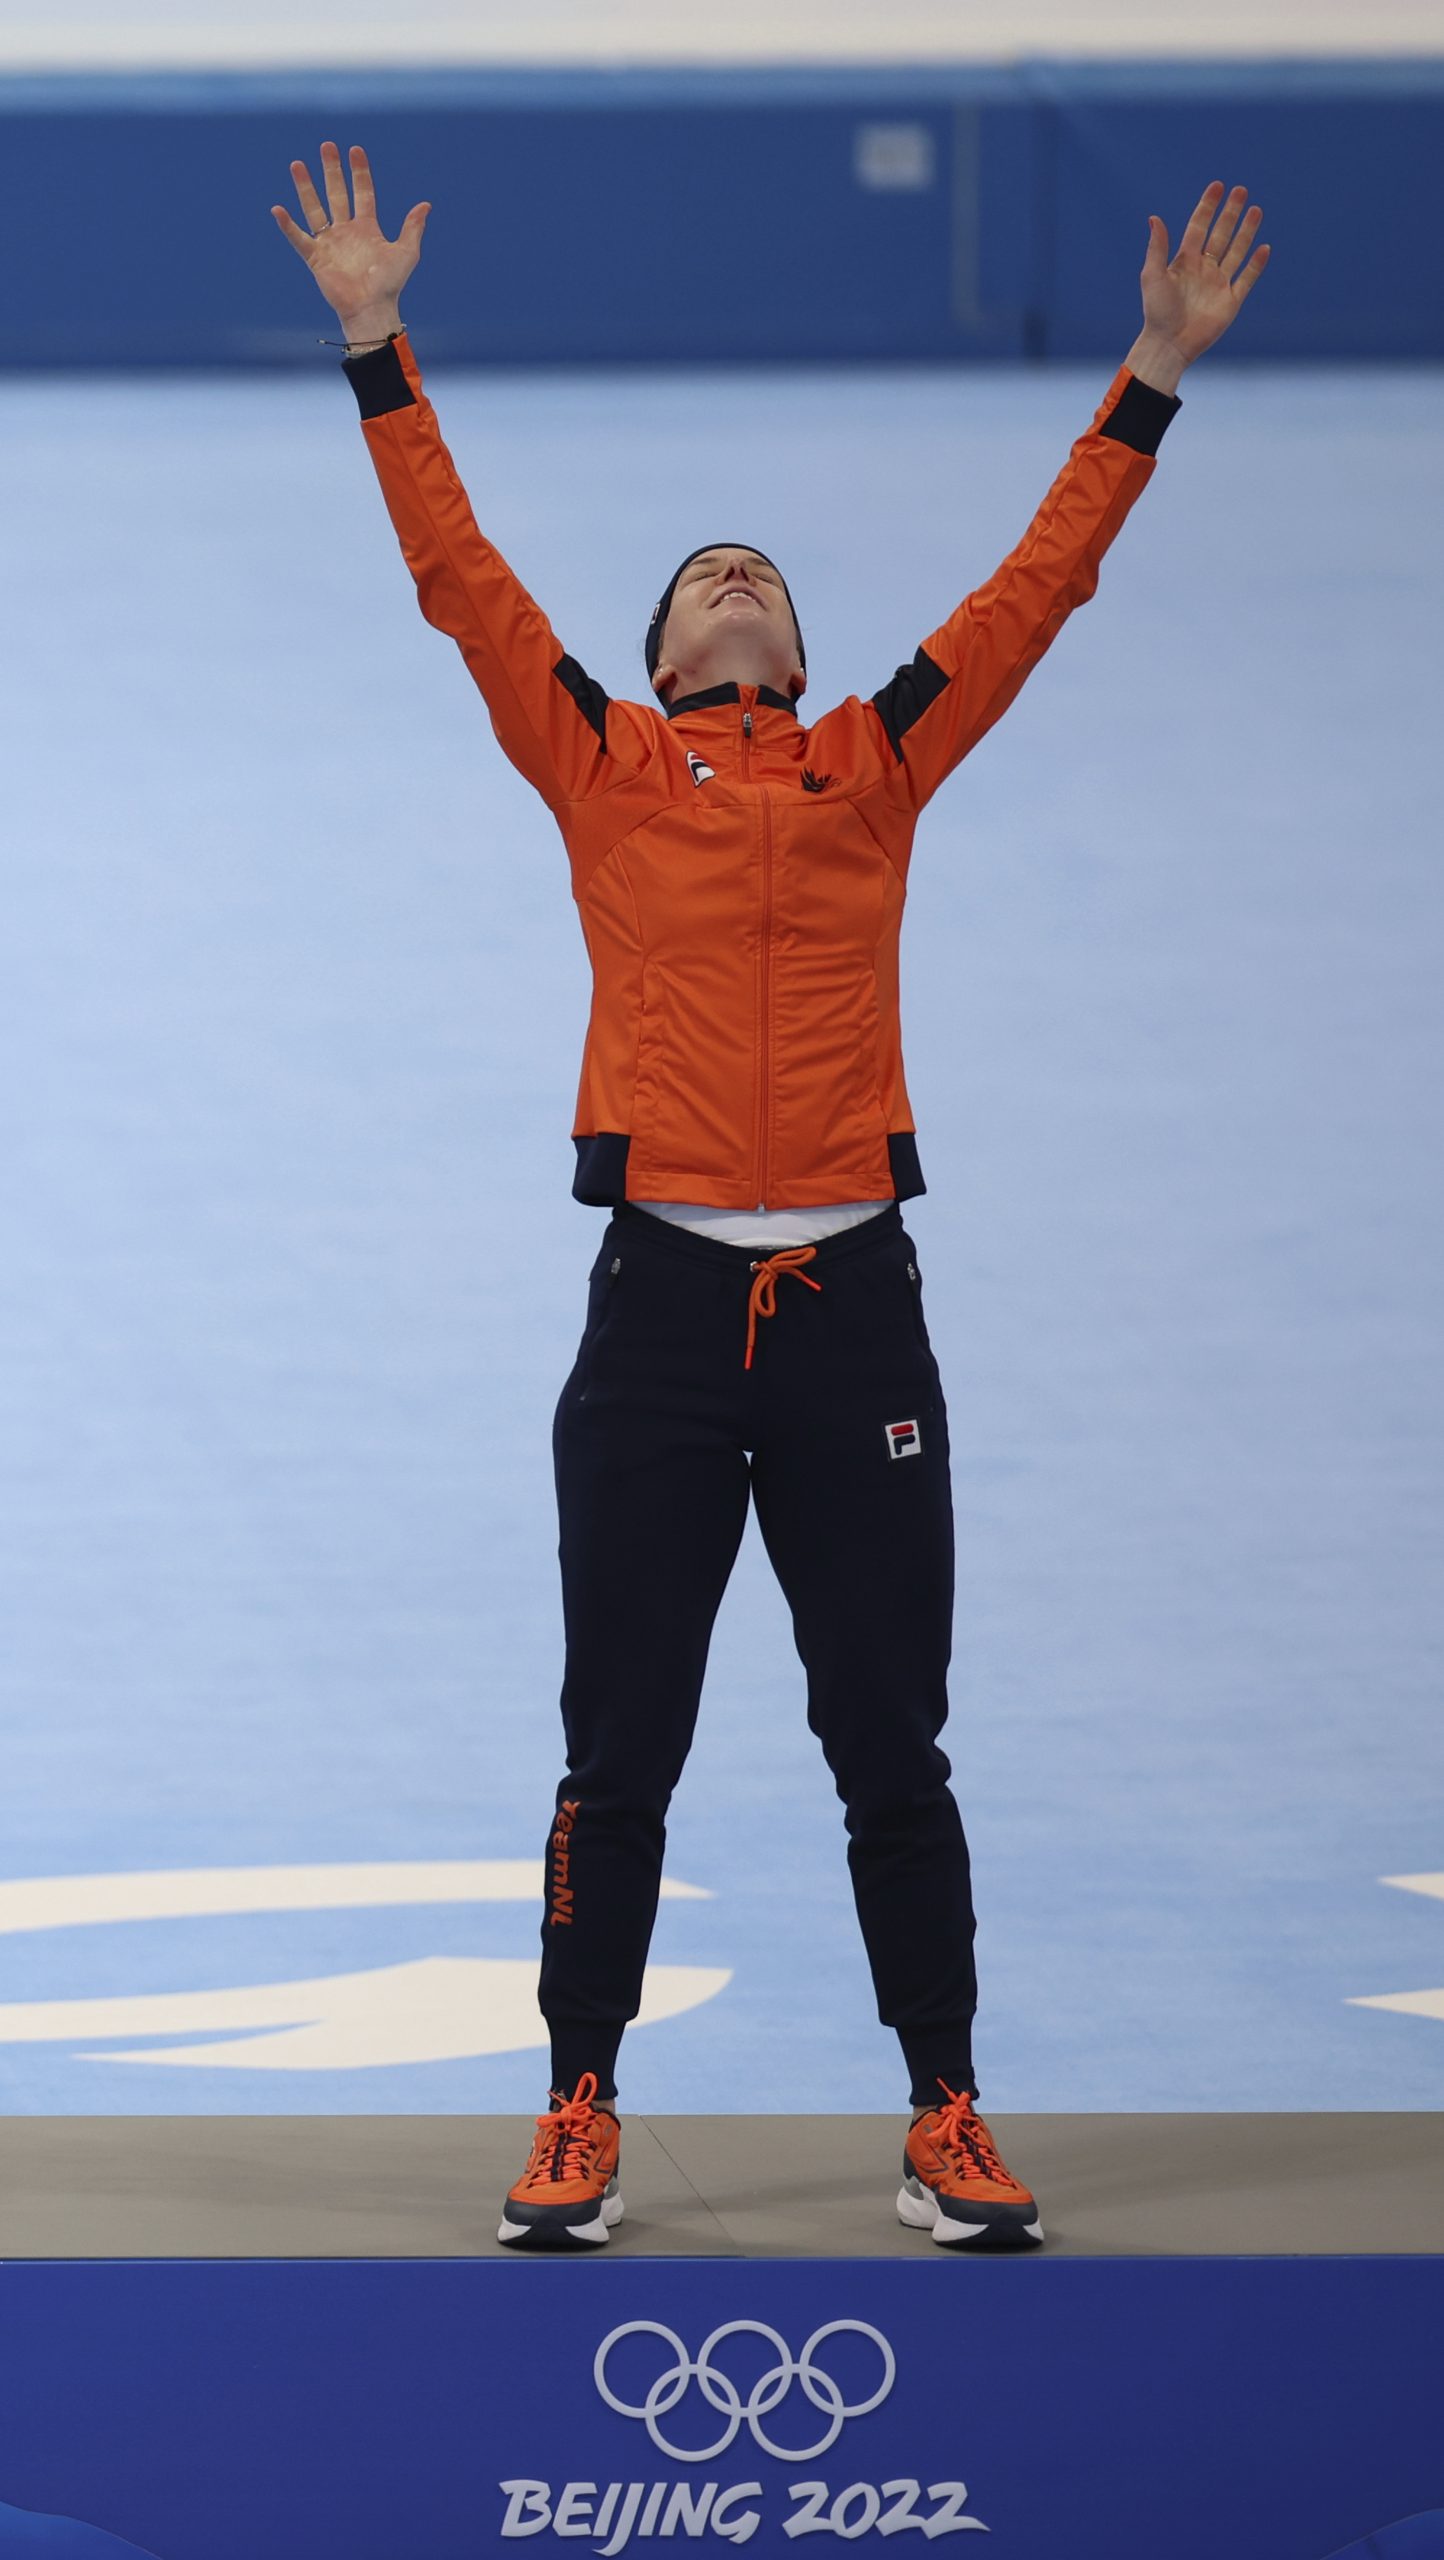 Ireen WUST of Netherlands sets new Olympic record to claim gold medal. (The Yomiuri Shimbun via AP Images )